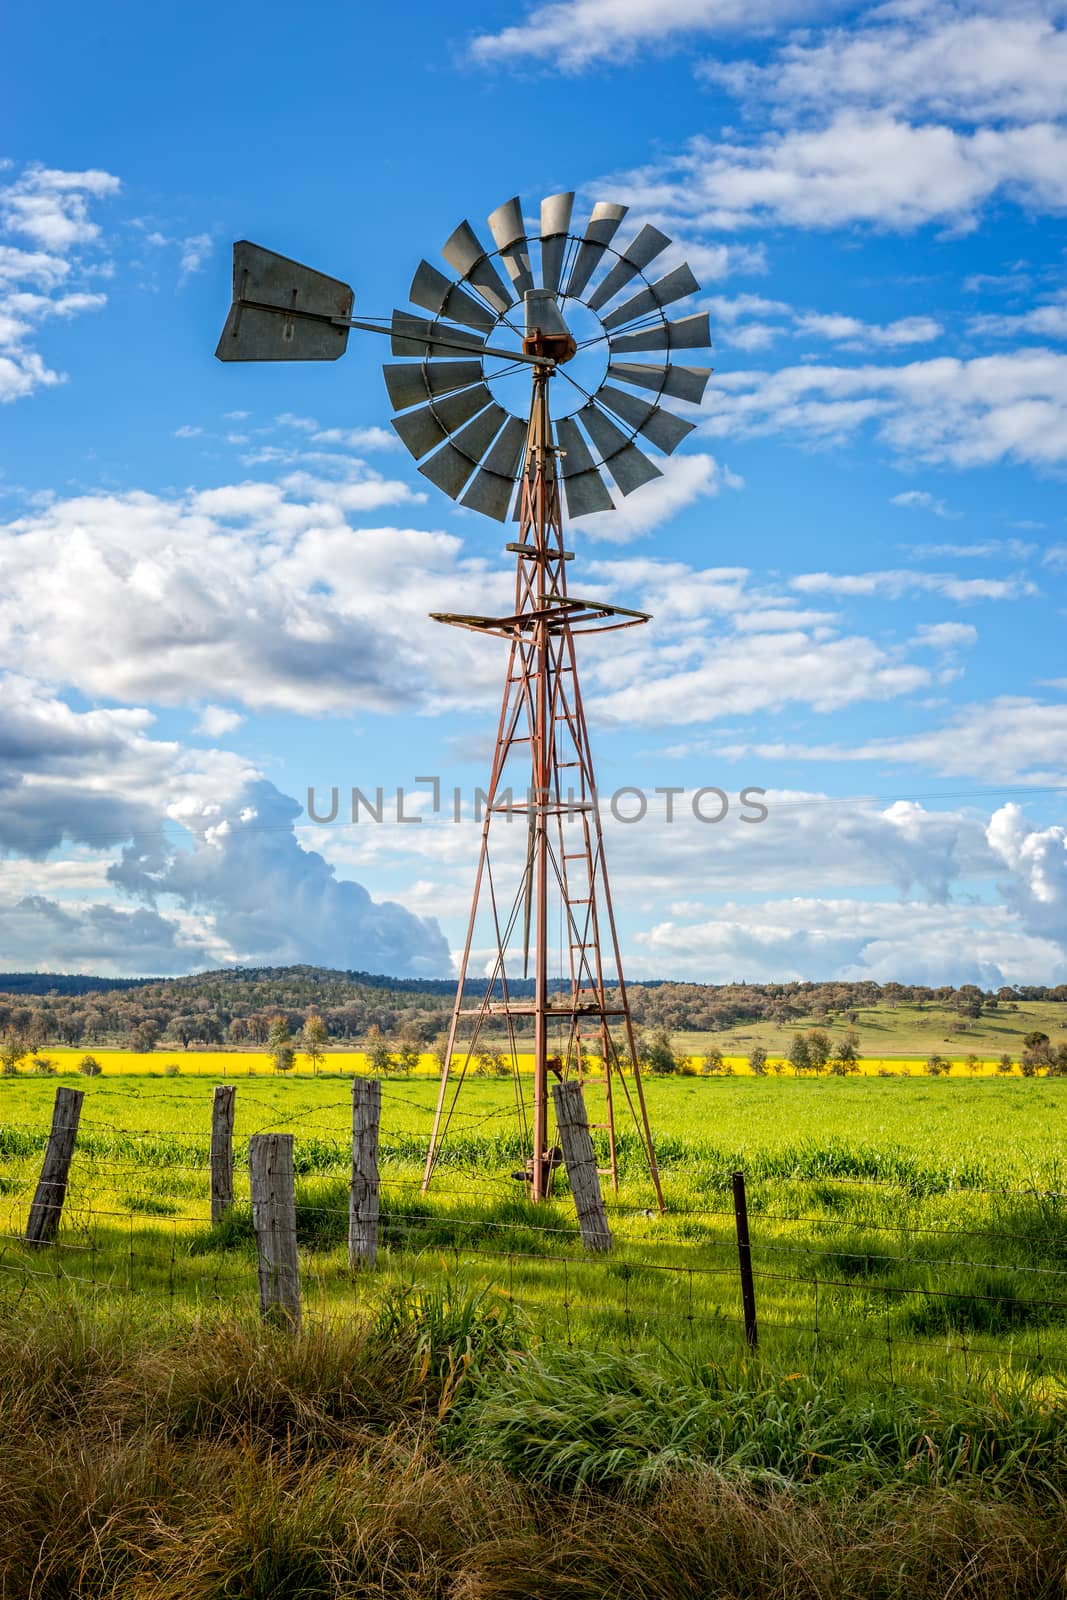 Southern Cross windmill in a rural field with crops by lovleah